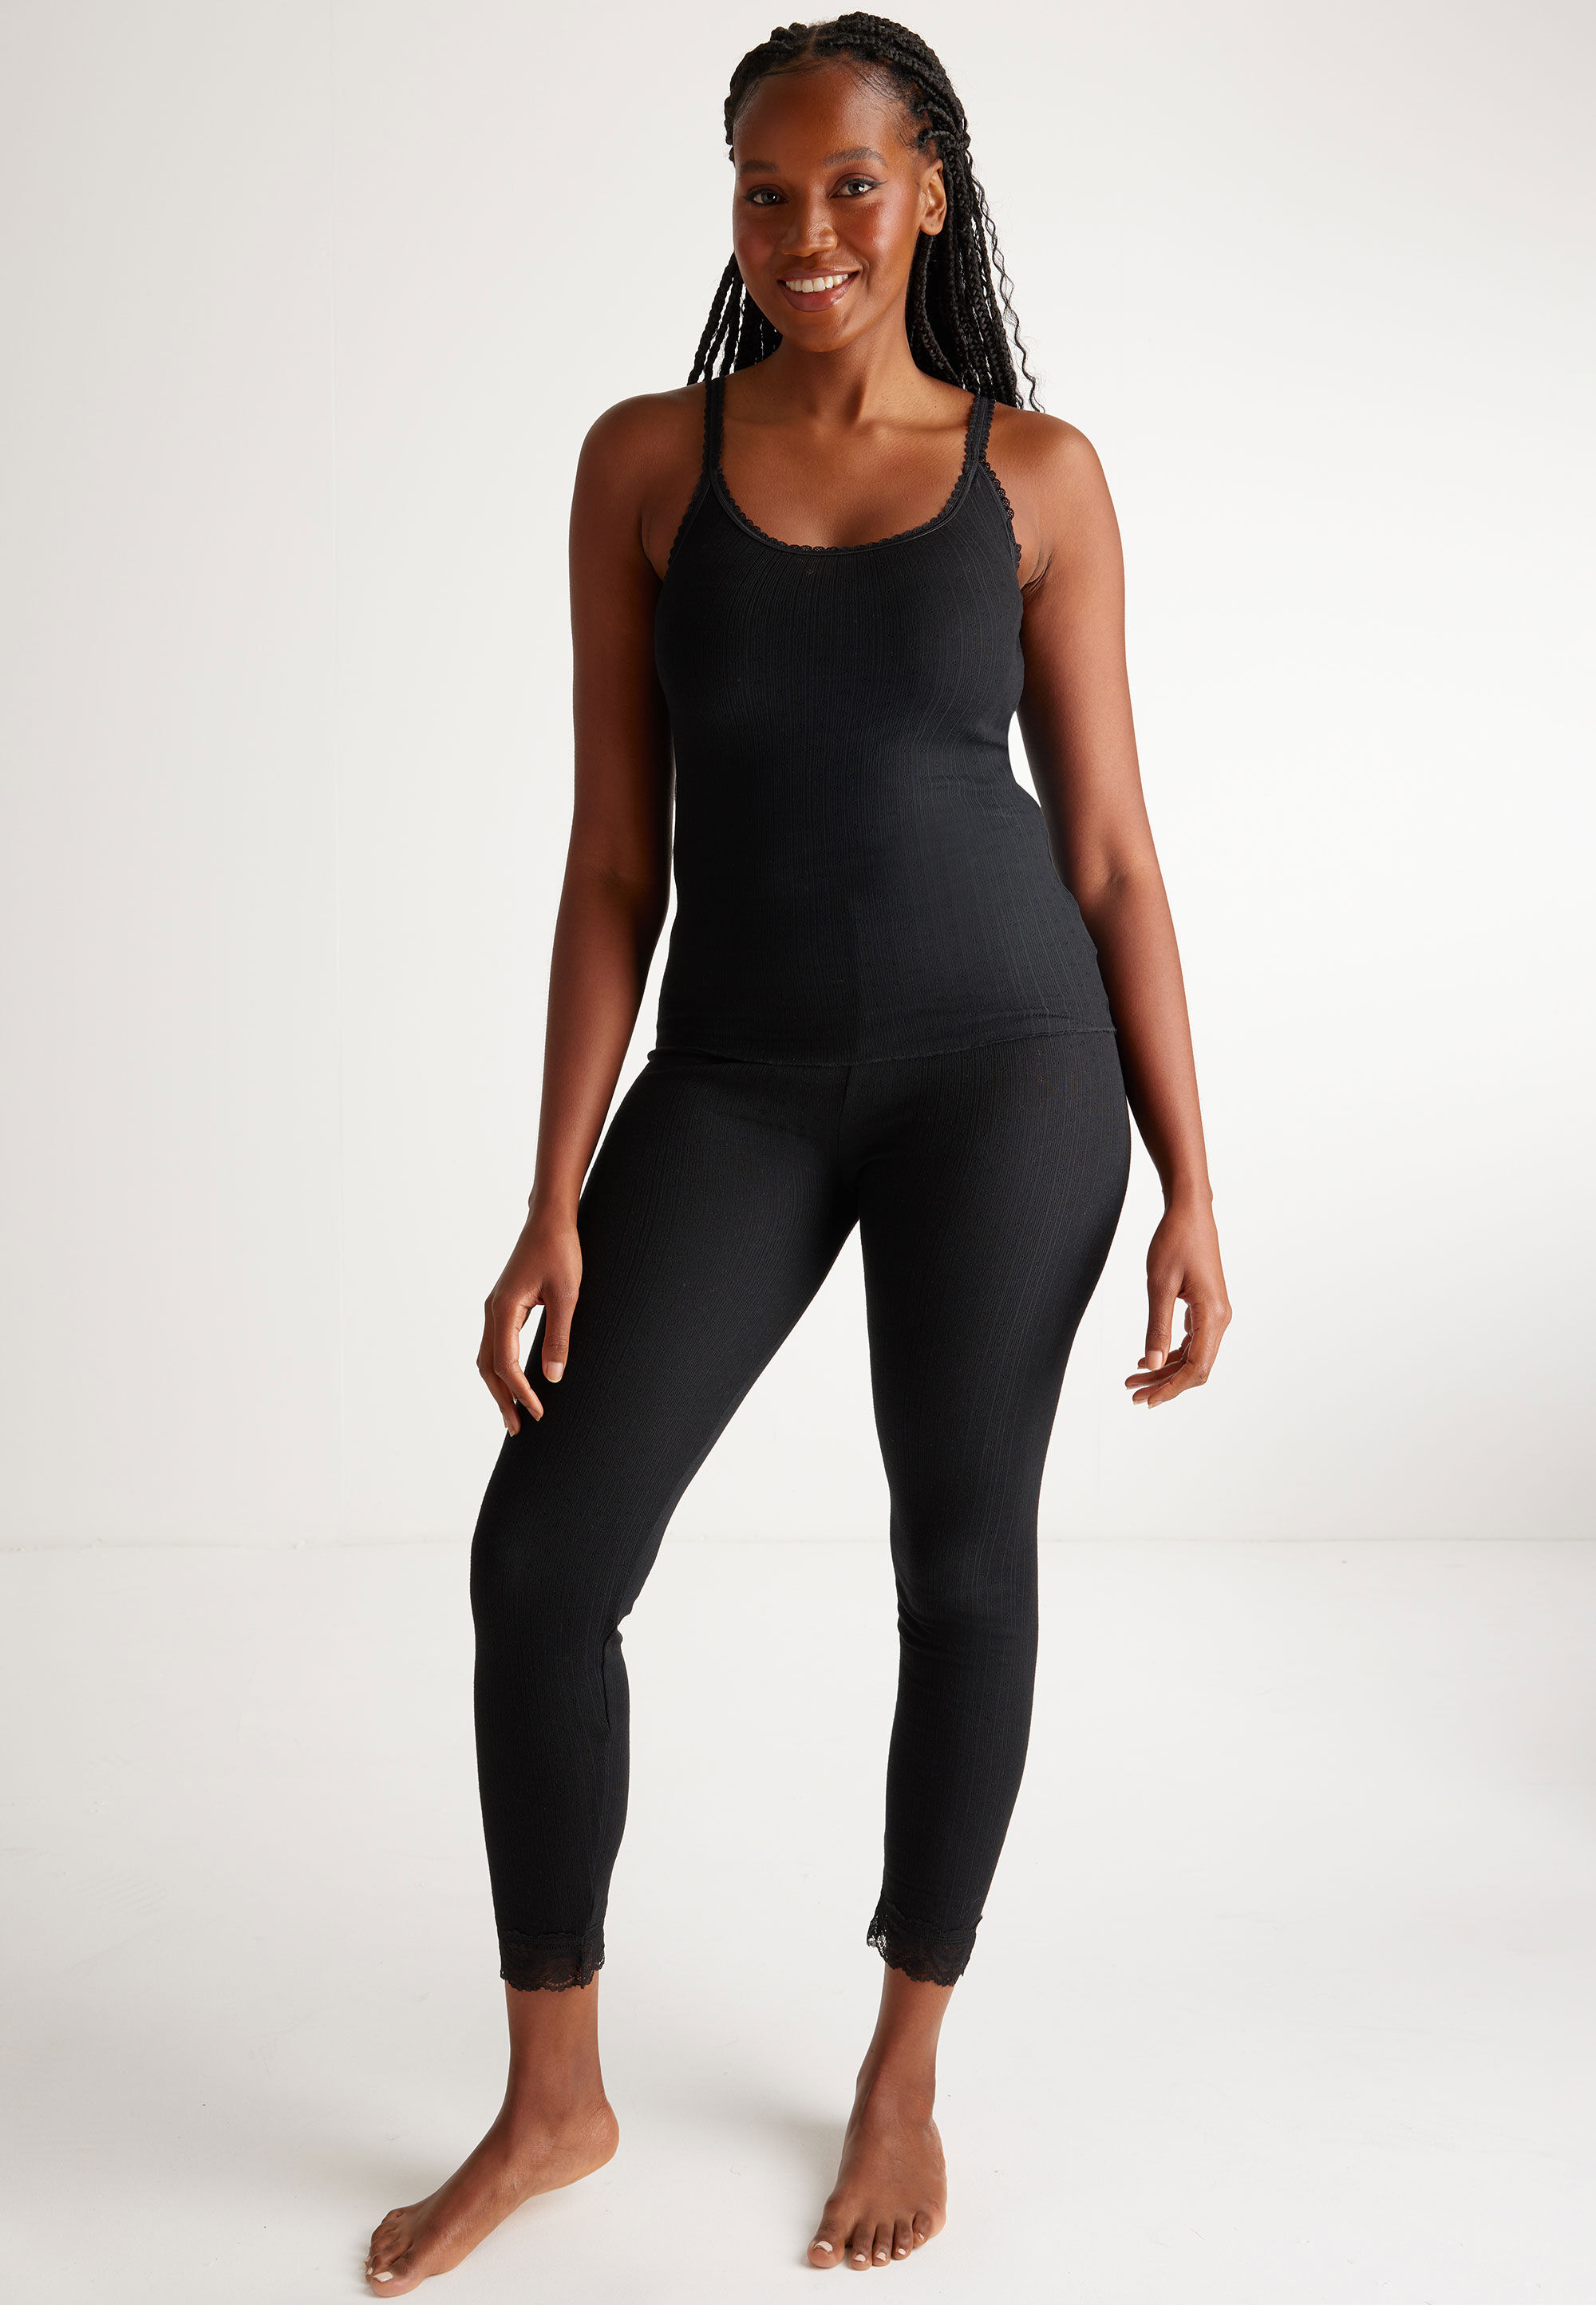 Womens Plain Black Thermal Camisole Top | Peacocks